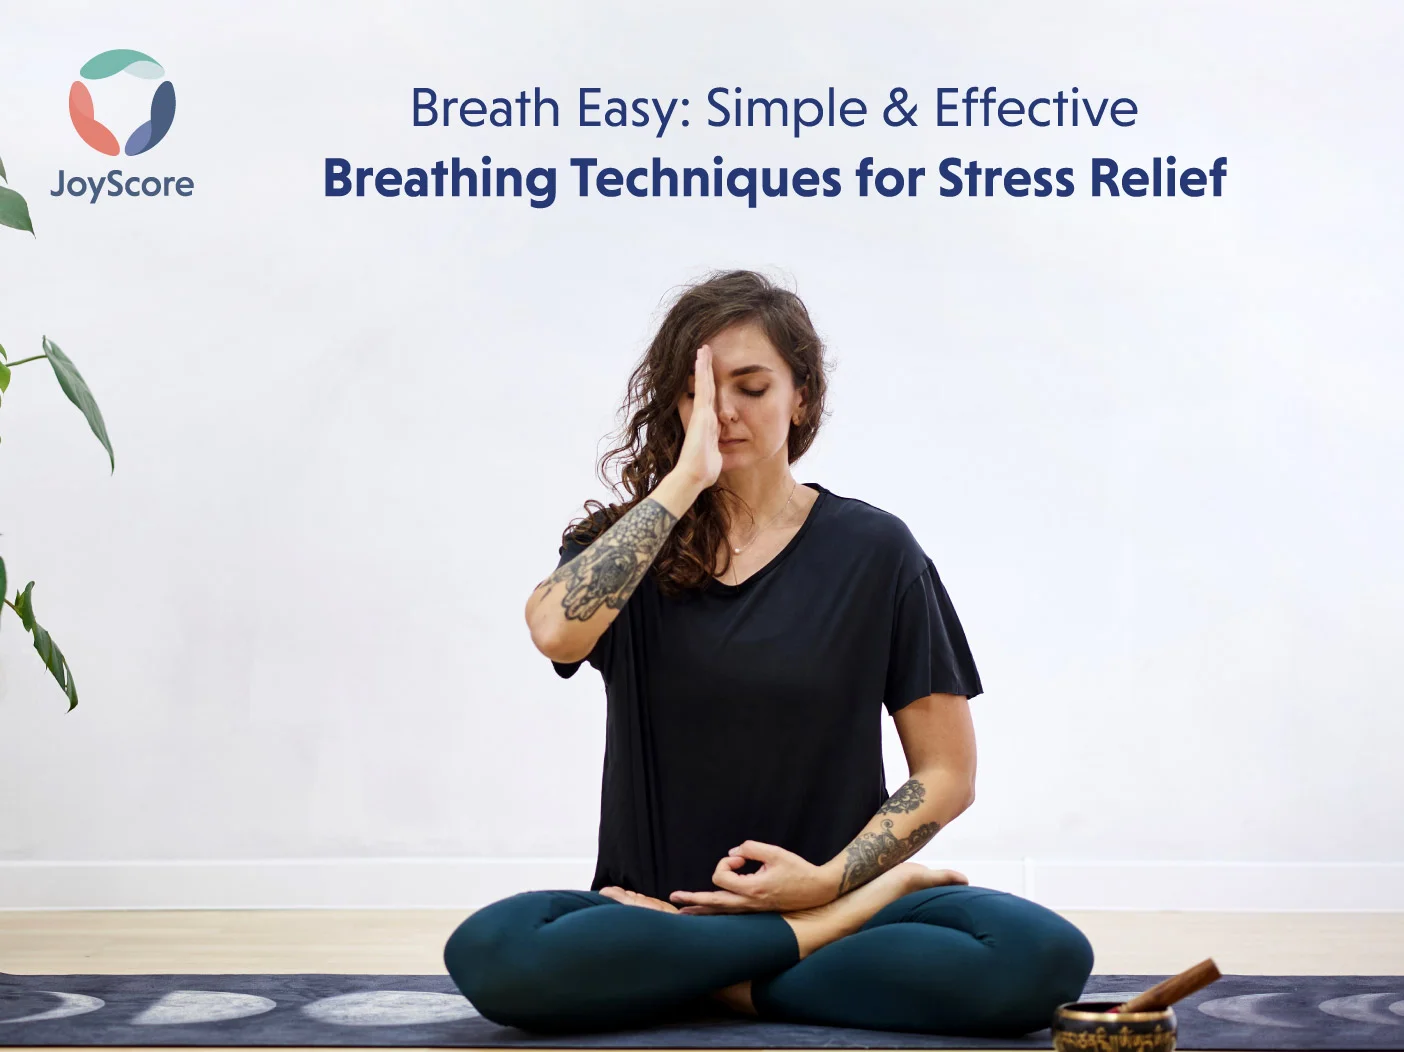 Breath Easy Effective Breathing Techniques for Stress Relief